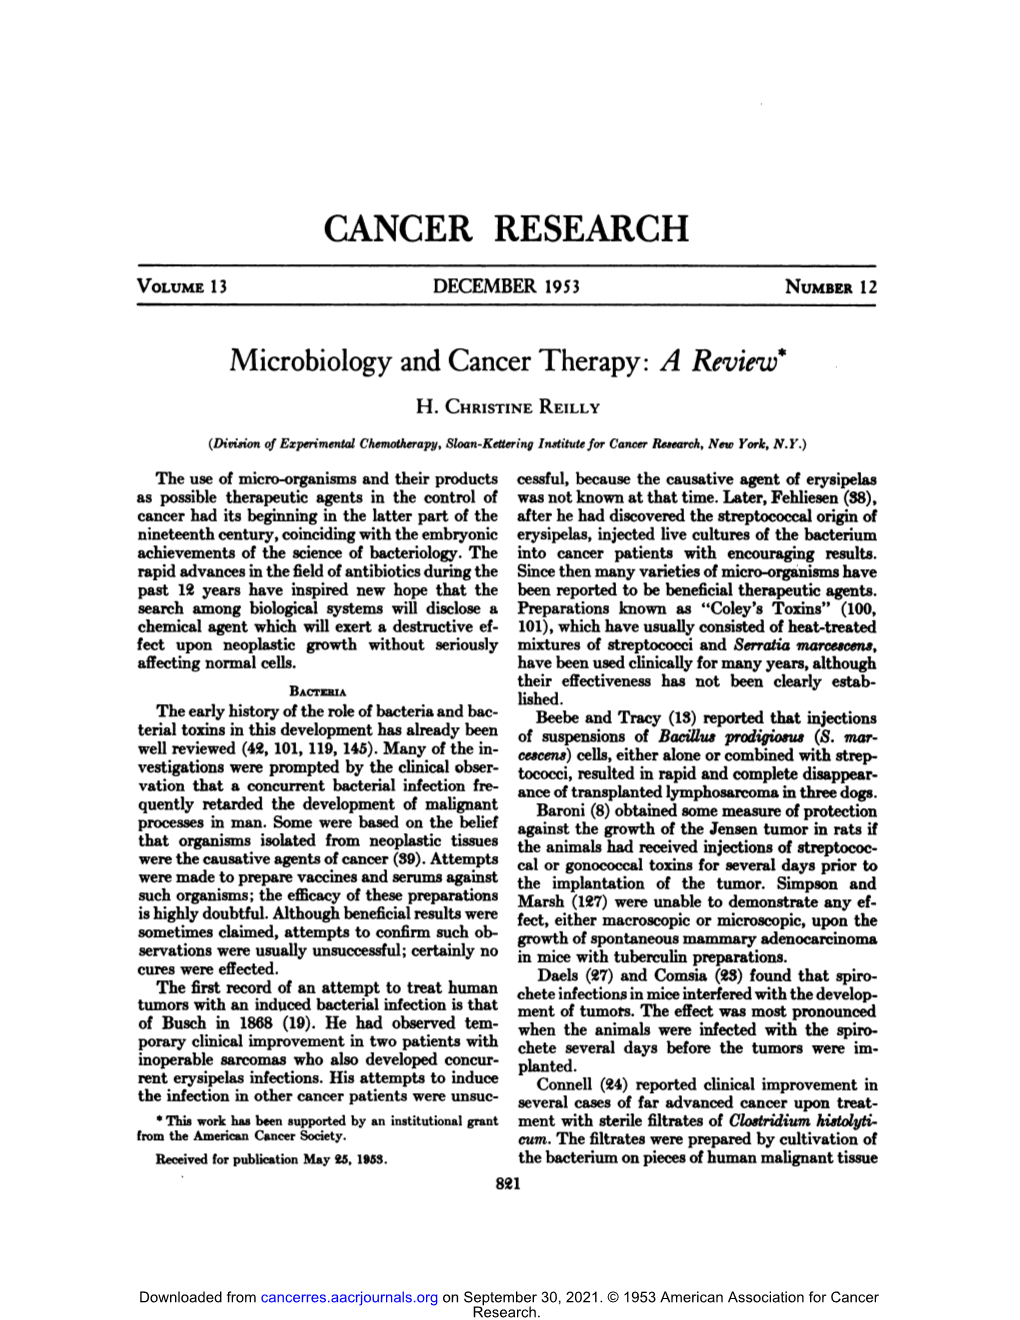 Microbiology and Cancer Therapy: a Review*